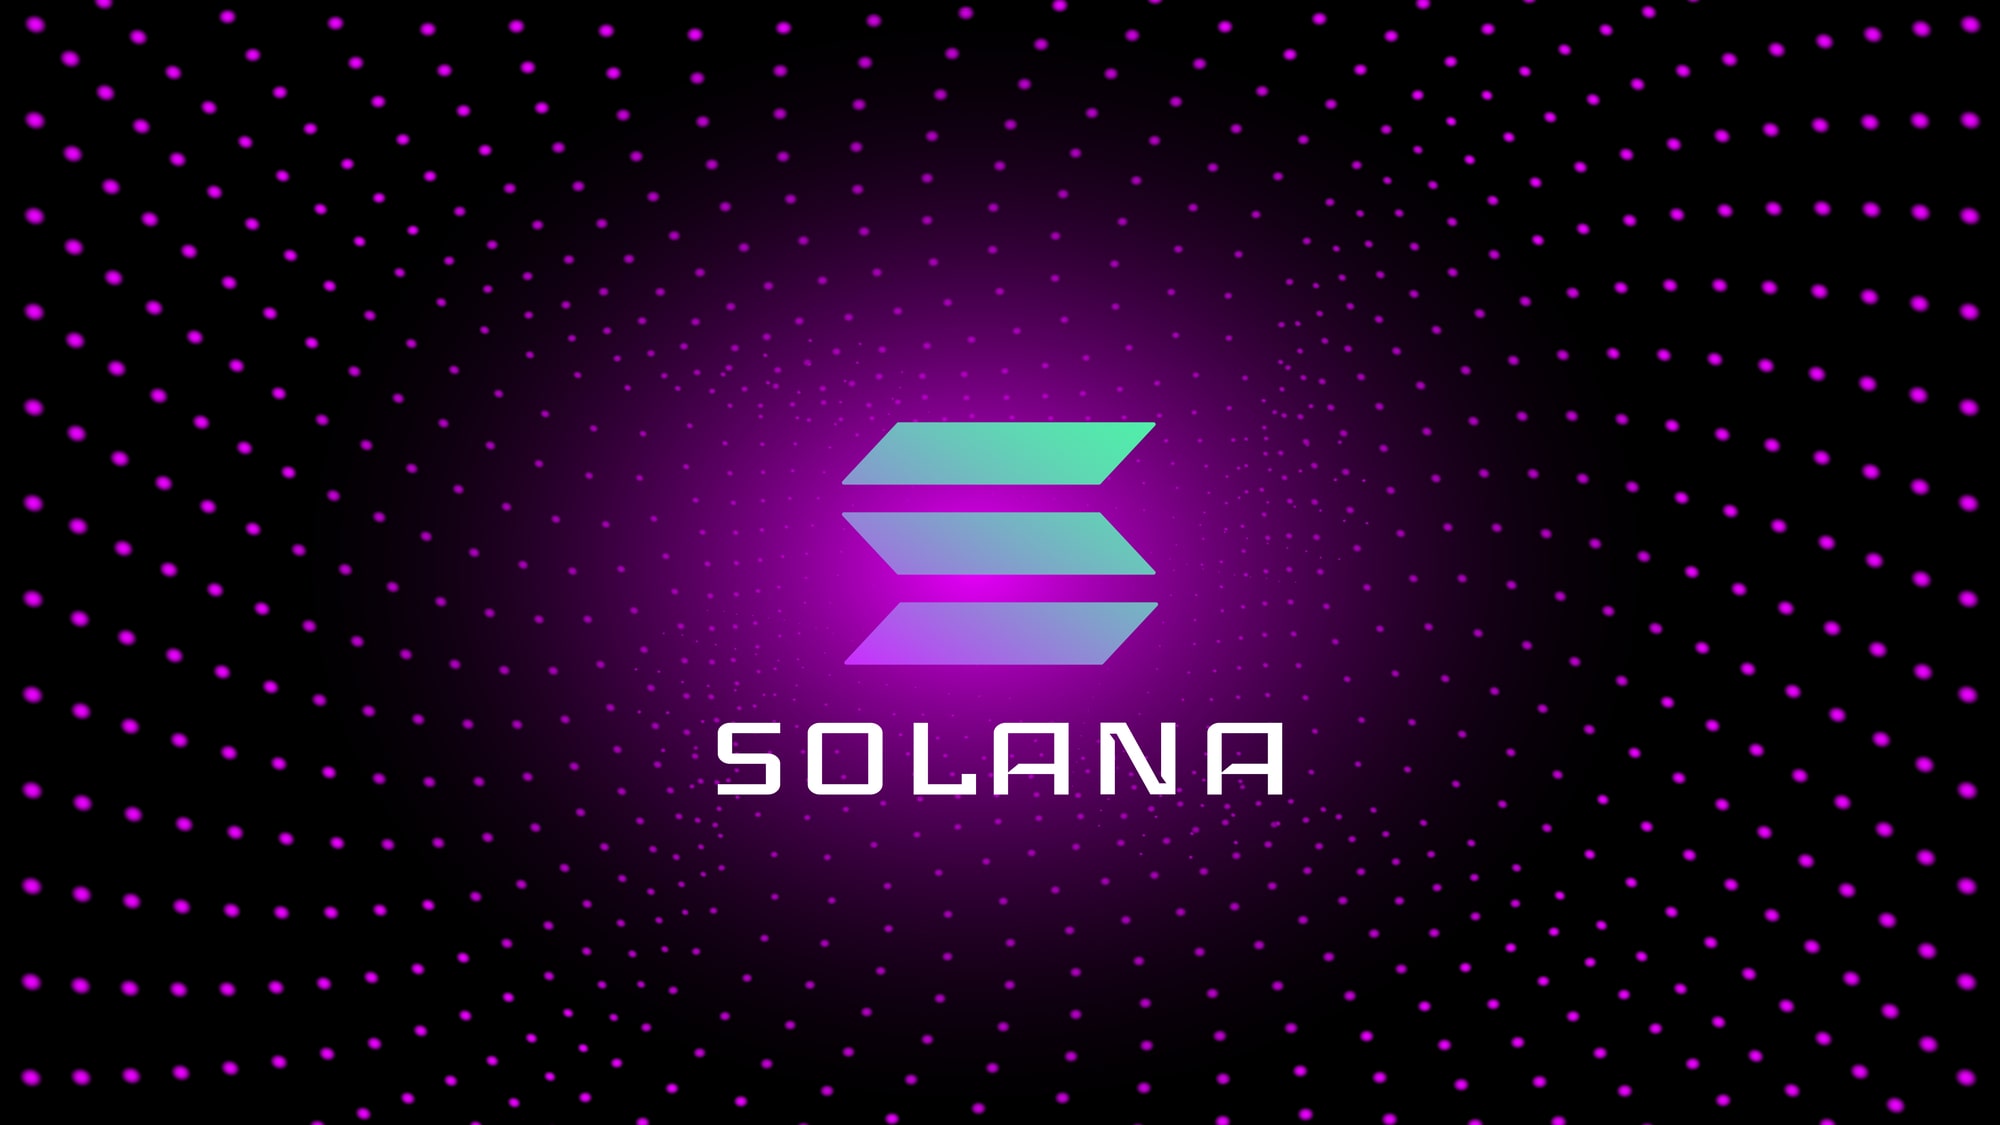 What is Solana?